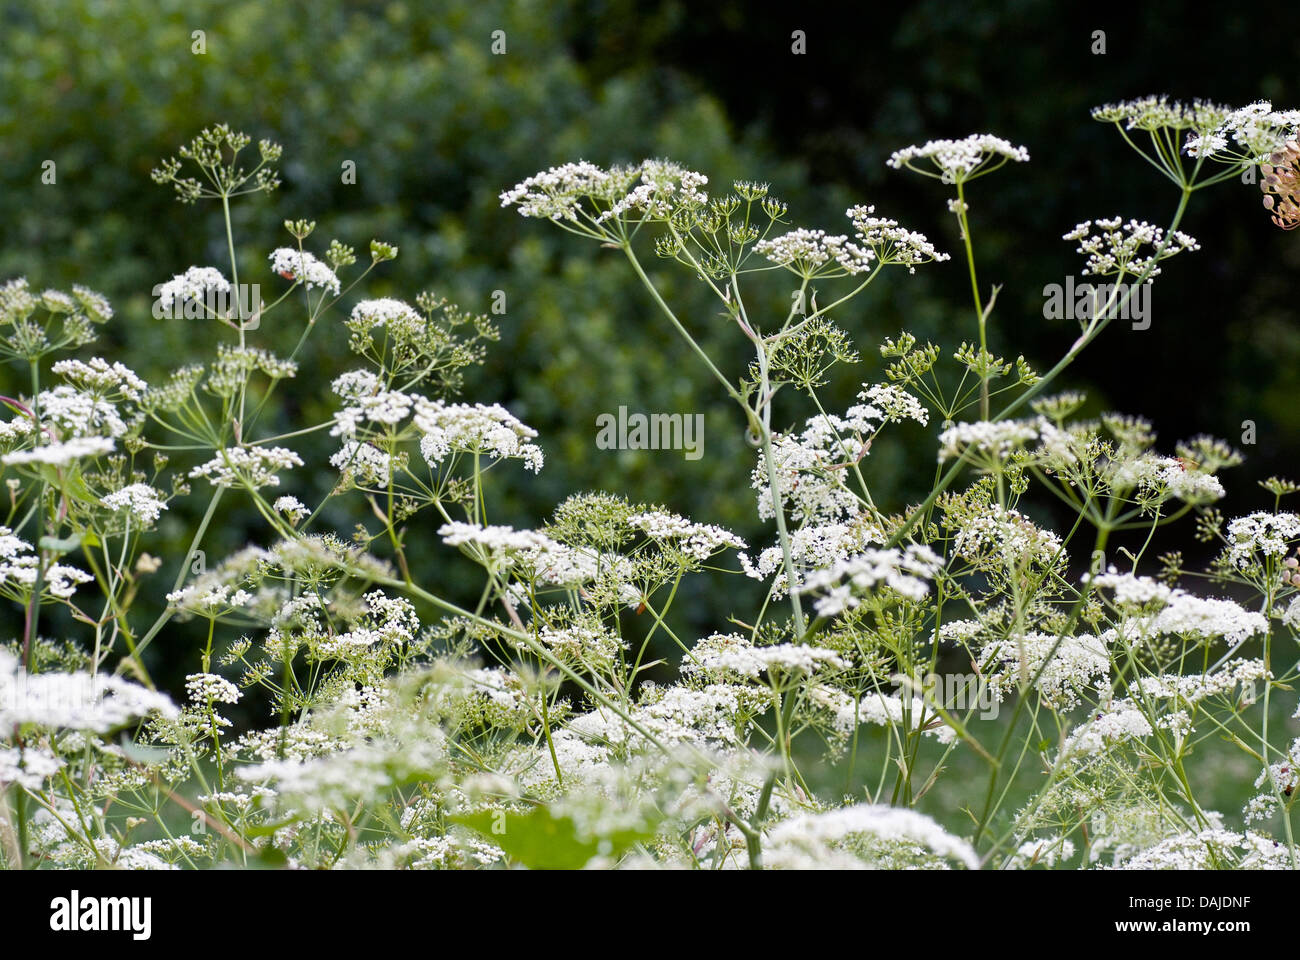 greater burnet saxifrage (Pimpinella major), blooming, Germany Stock Photo